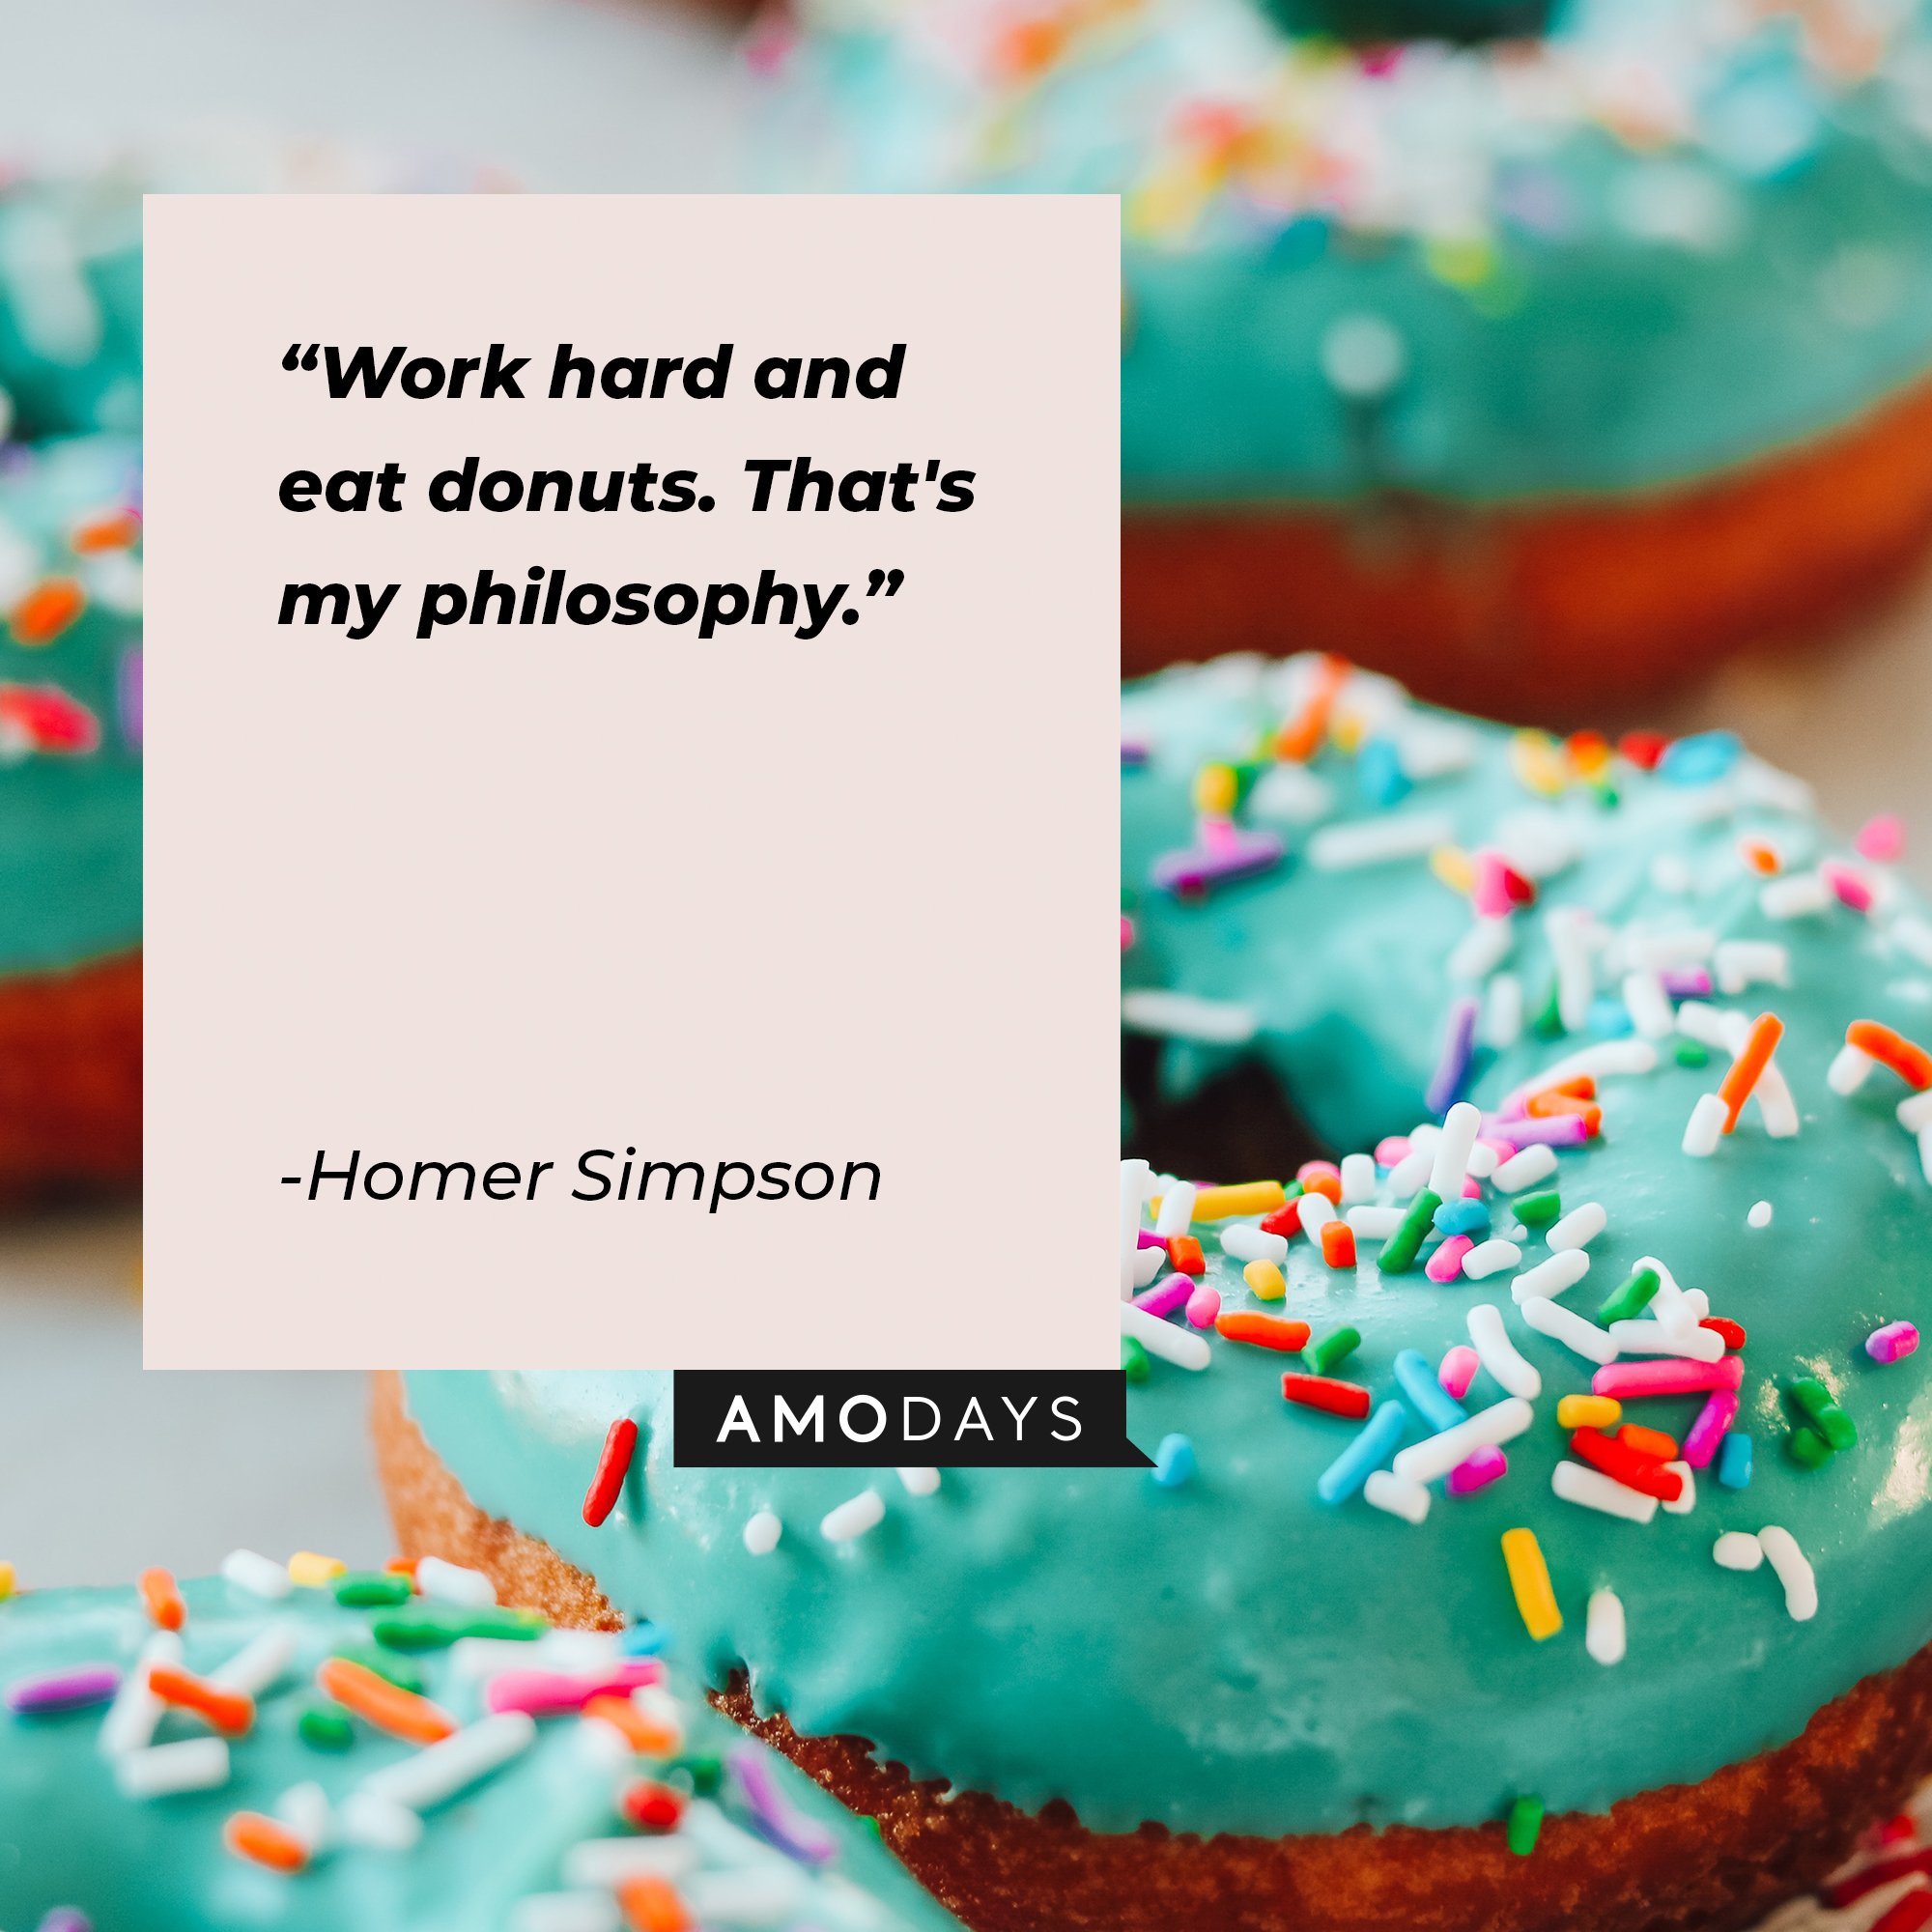 Homer Simpson's quote: "Work hard and eat donuts. That's my philosophy." | Image: AmoDays